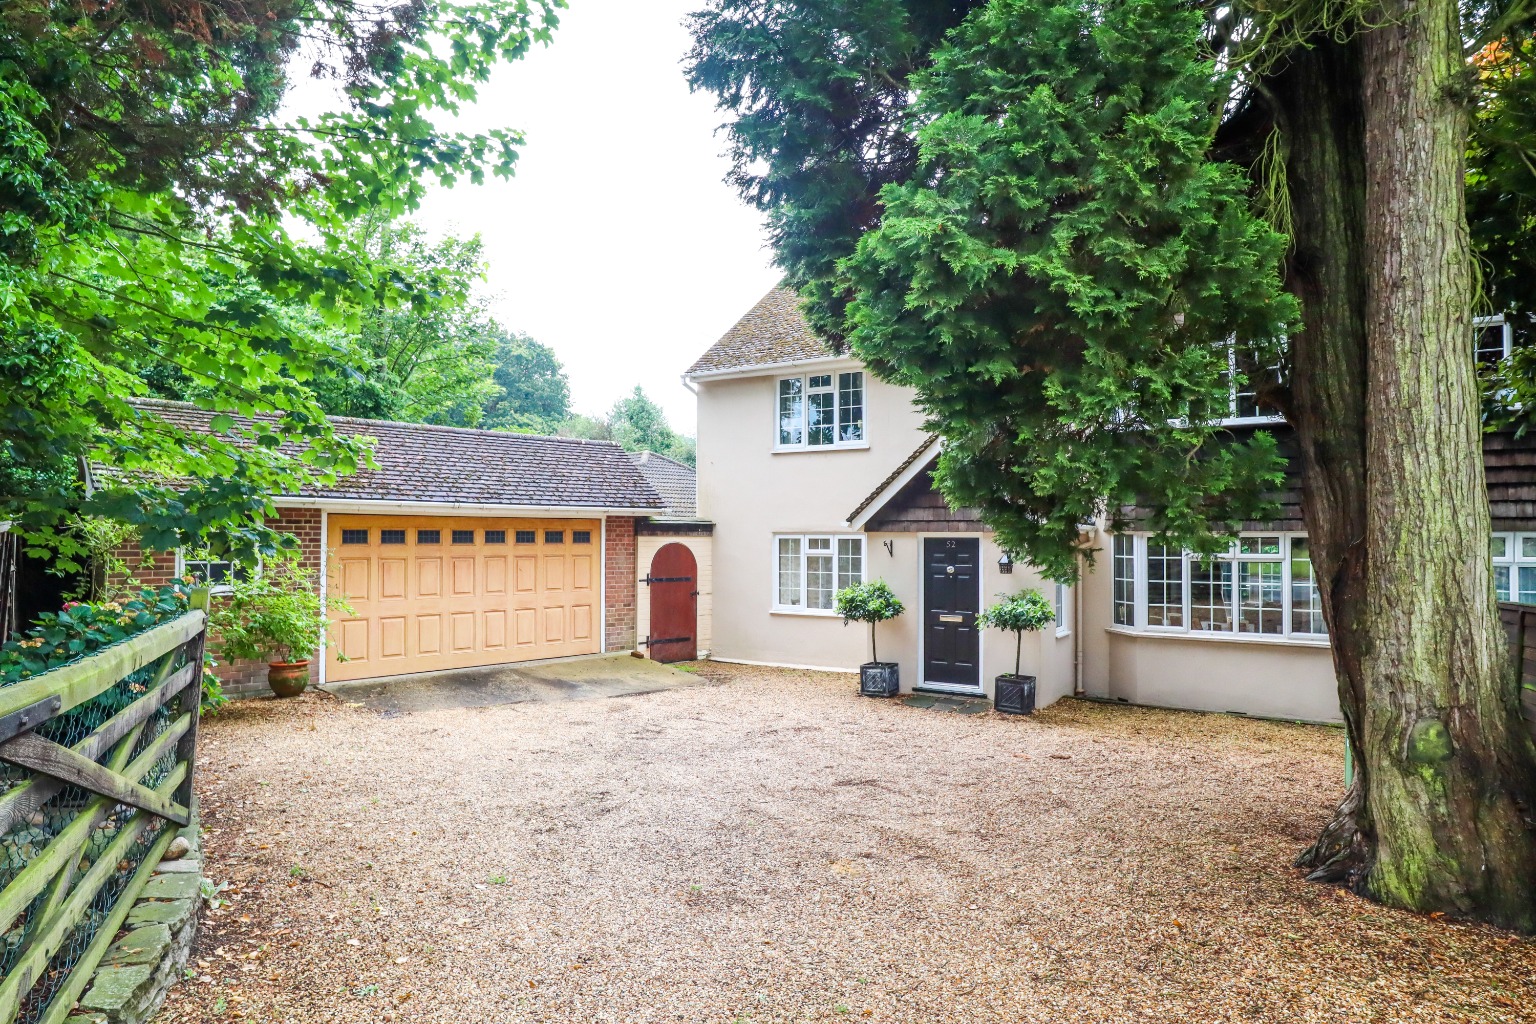 5 bed semi-detached house for sale in Wharf Road, Camberley - Property Image 1